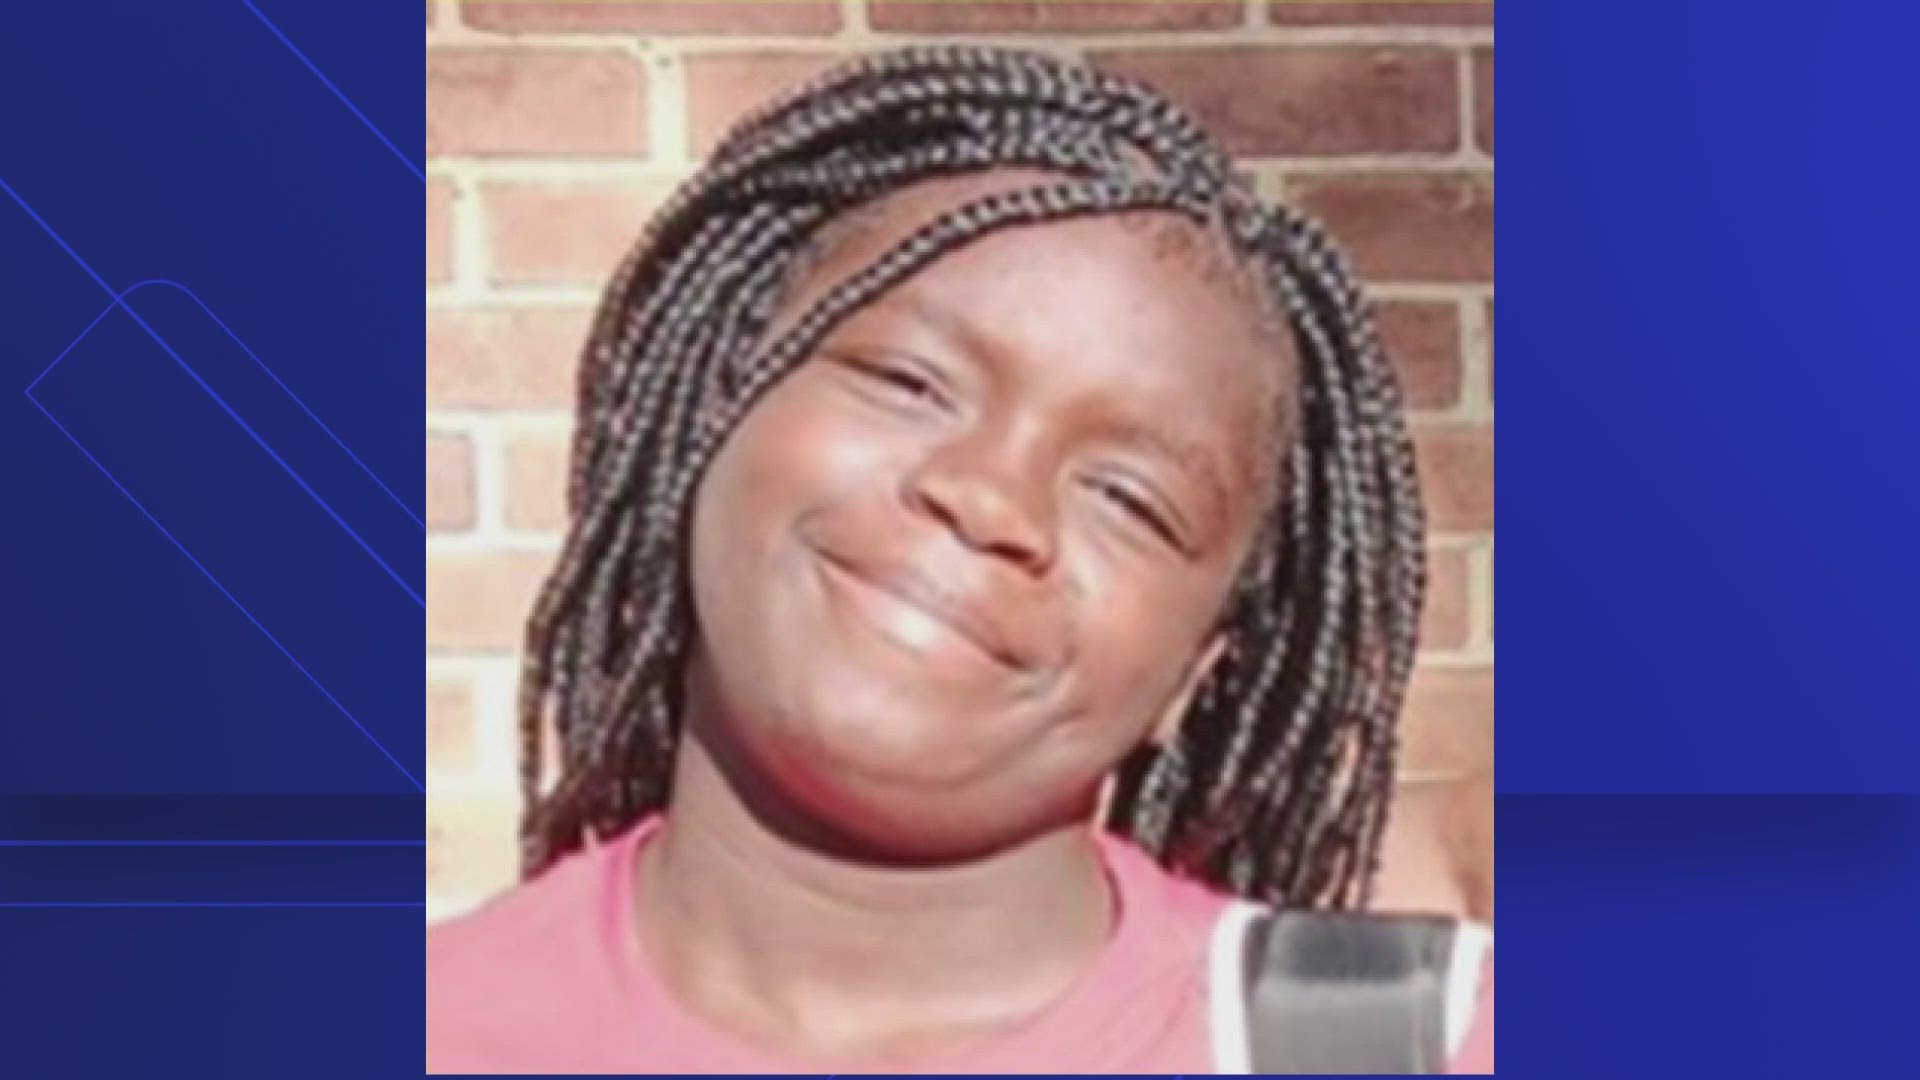 Miracle Plummer was last seen in the 600 block of Maryland Avenue in Southwest D.C. around 7 p.m. Sunday.